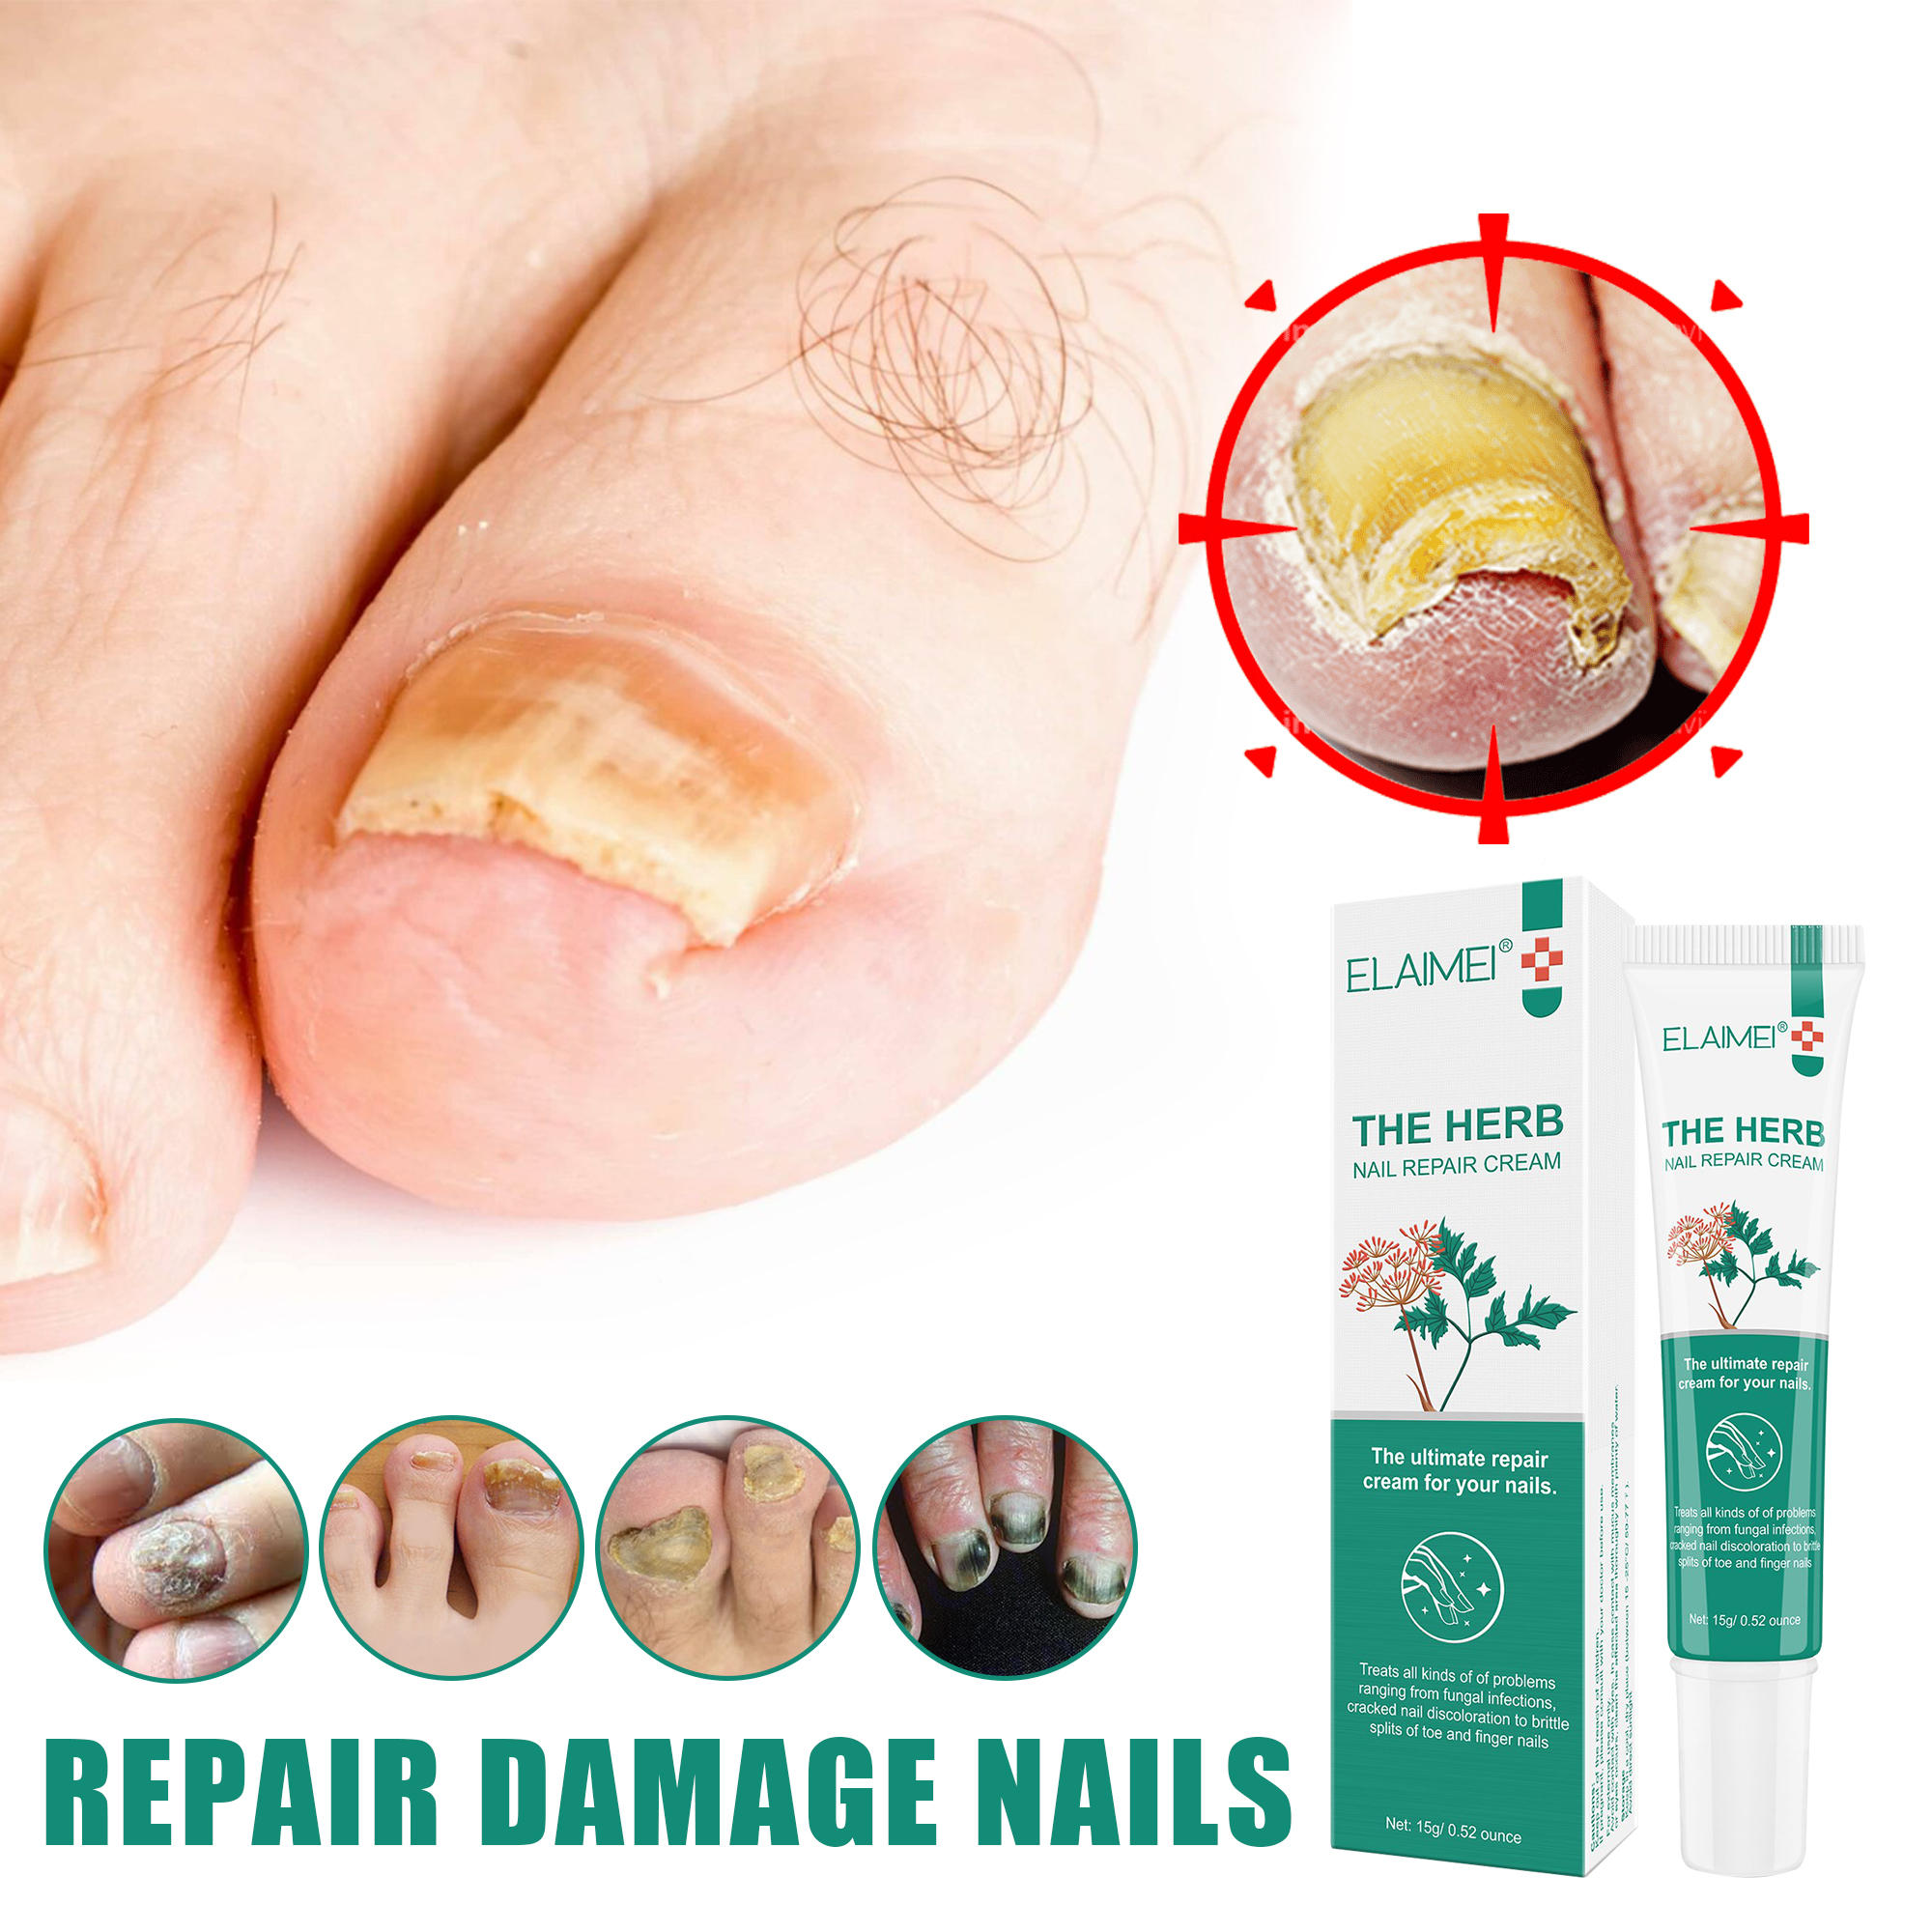 How To Strengthen Nails: 13 Tips And Tricks | Foot Spa Nail Repair Gel  Quickly Improves The Appearance Of Infected/cracked Nails 